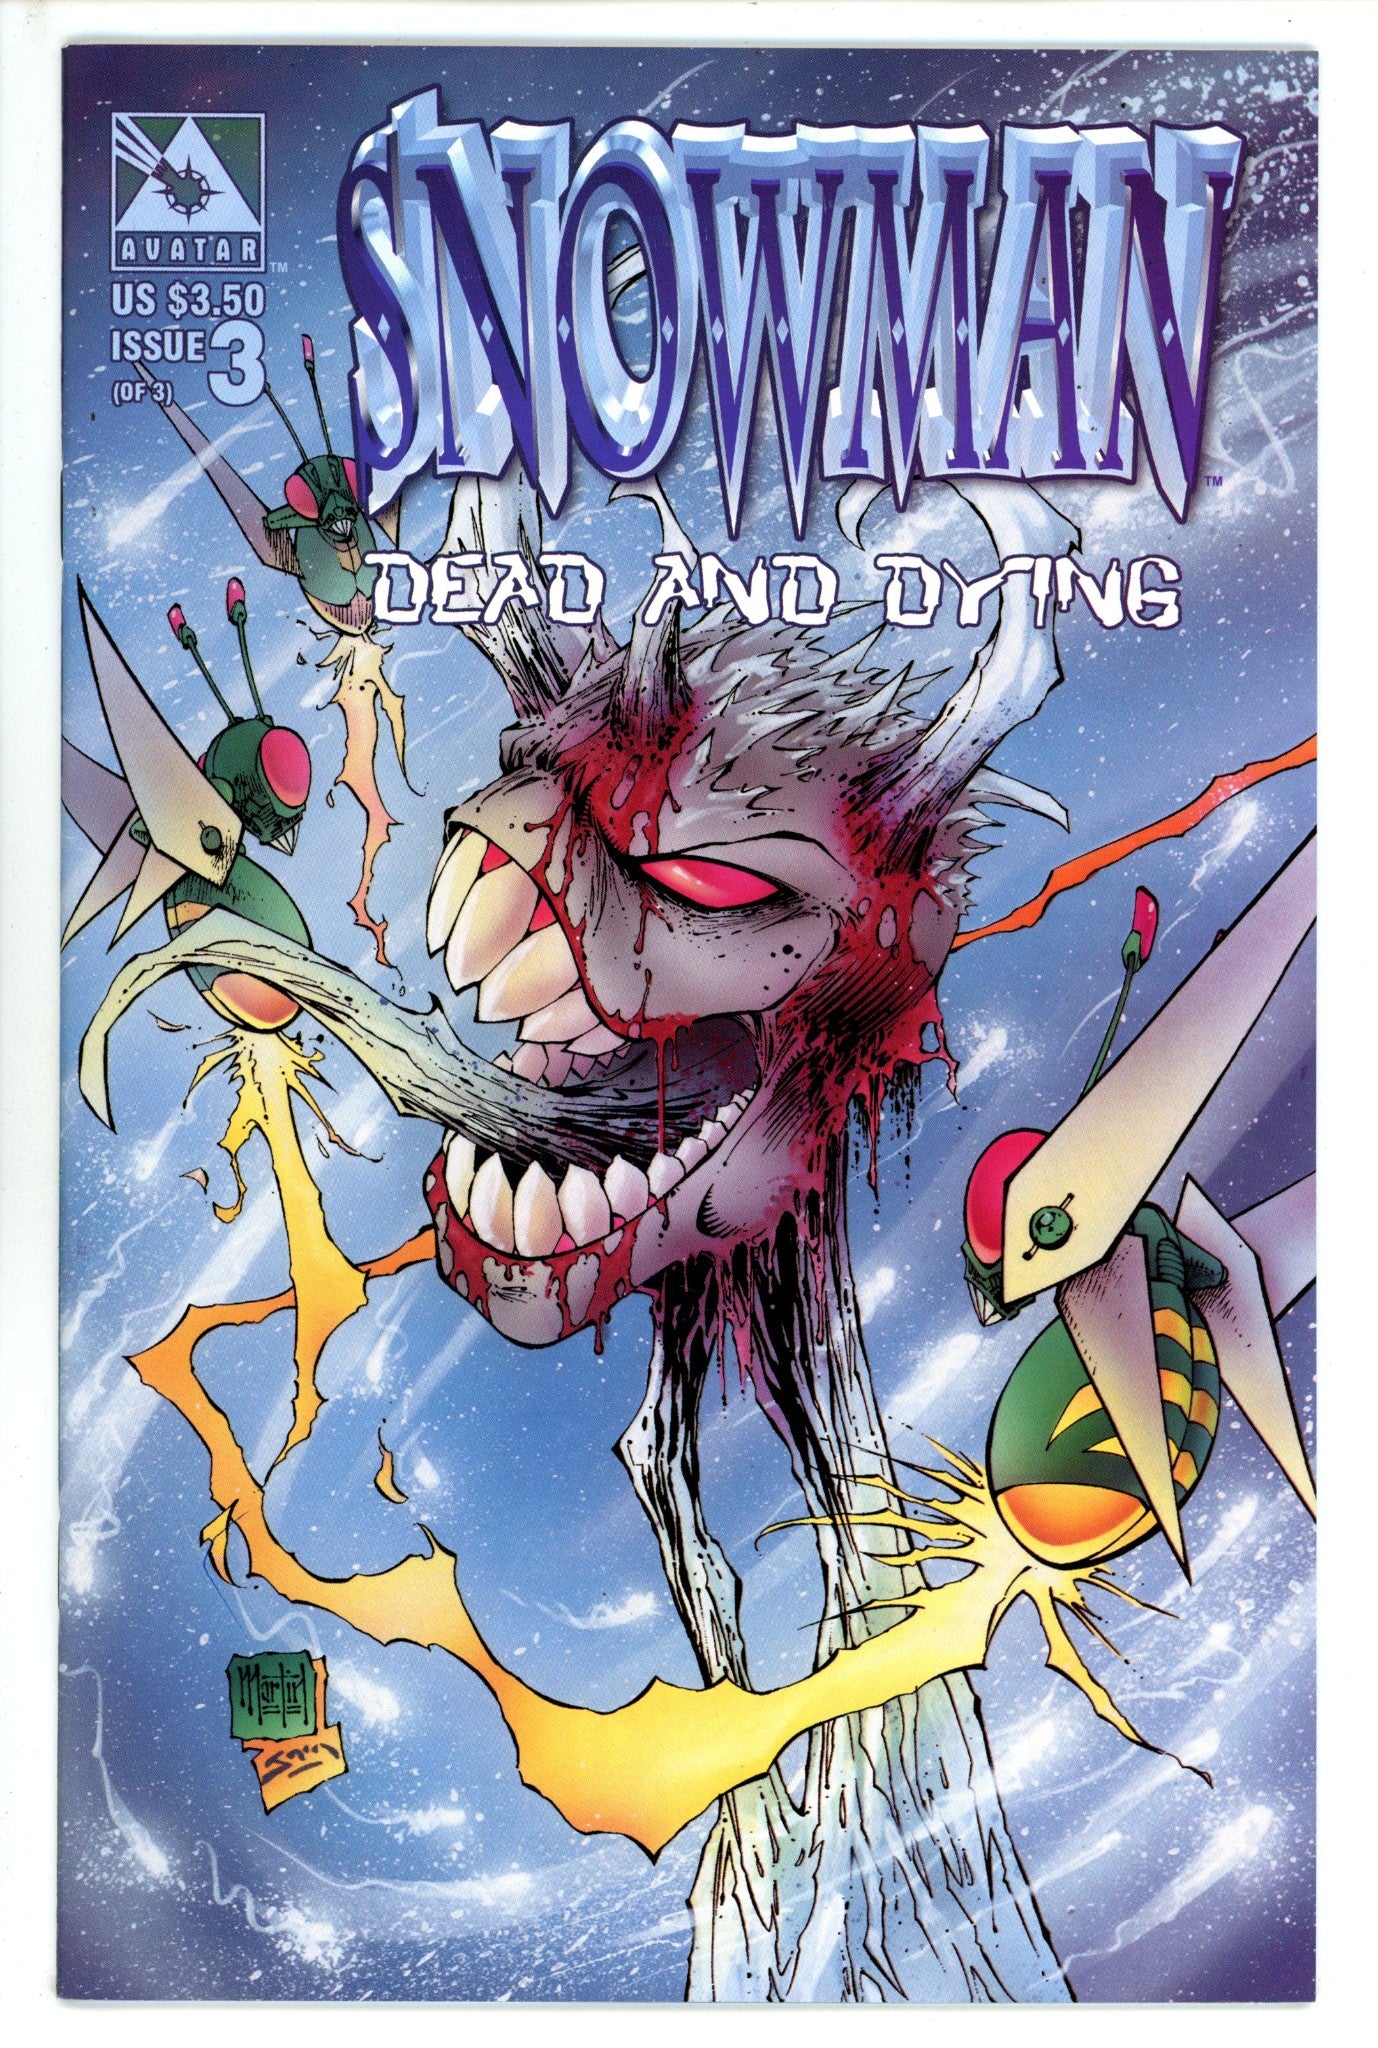 Snowman: Dead and Dying 3 (1998)